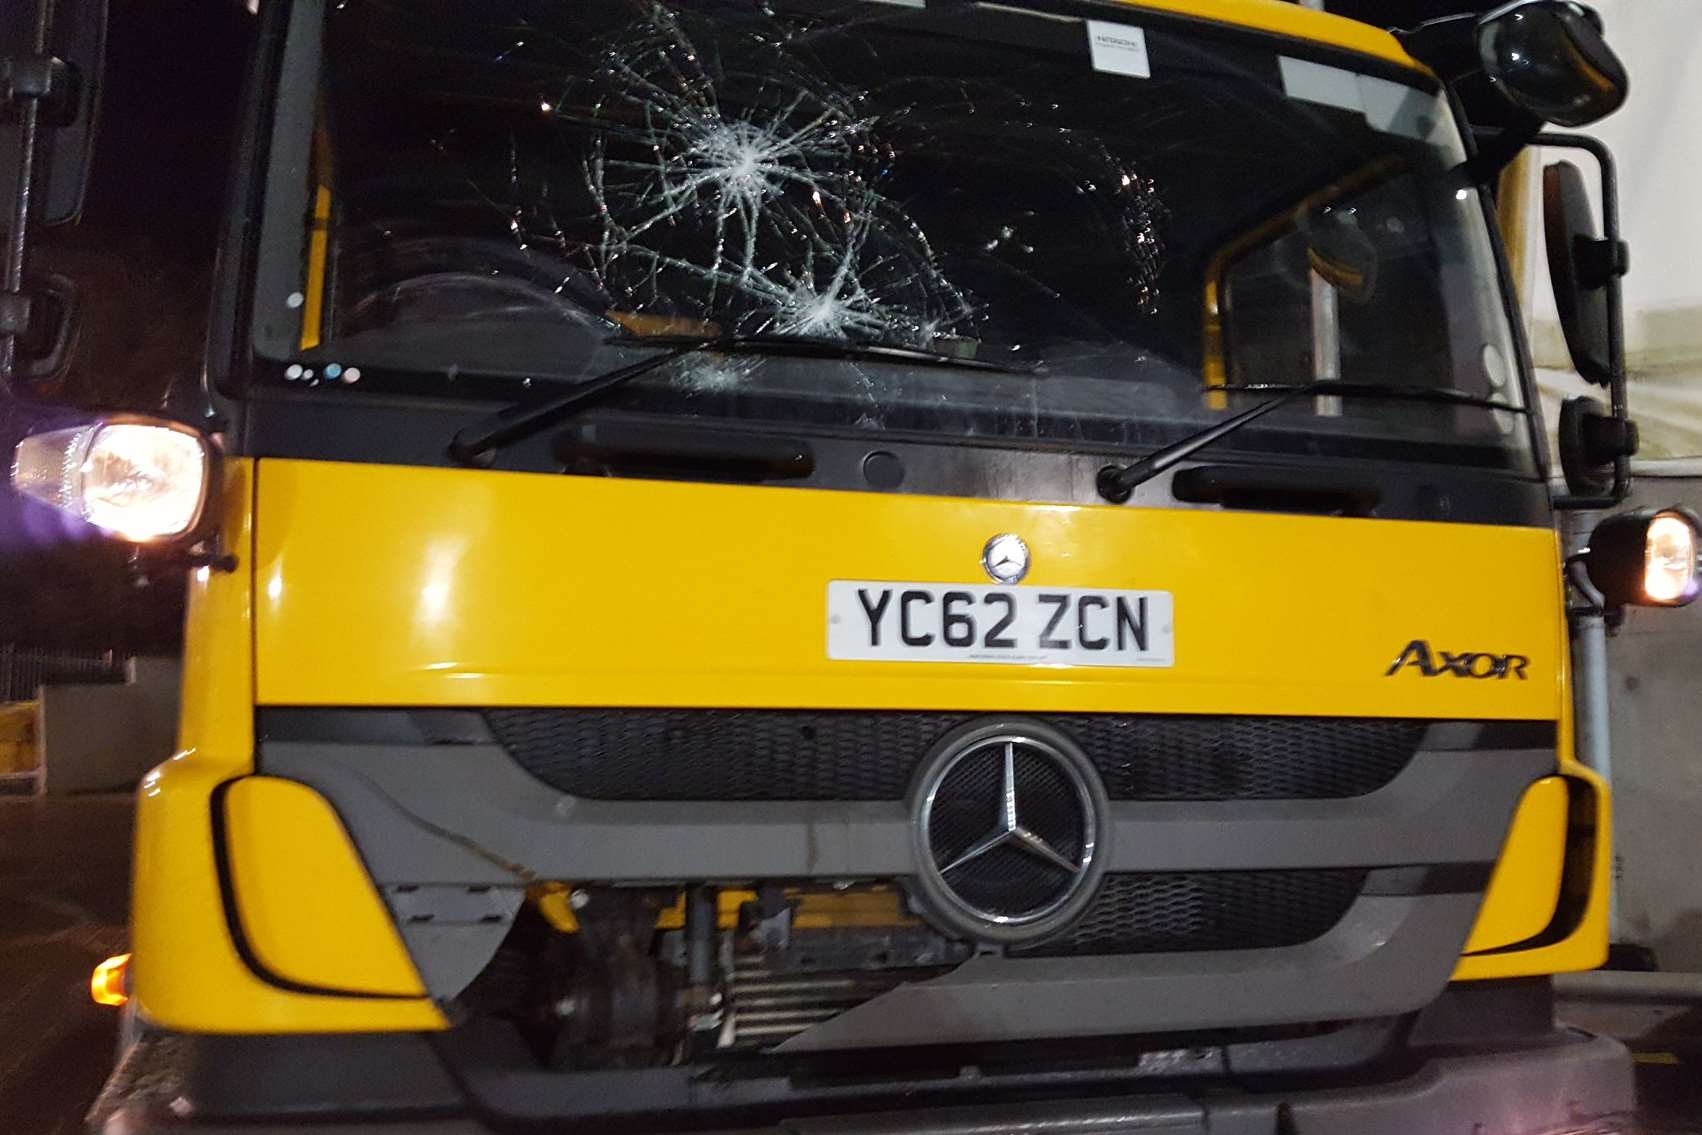 Damage done to the front of the lorry. Picture: Gritting Kent